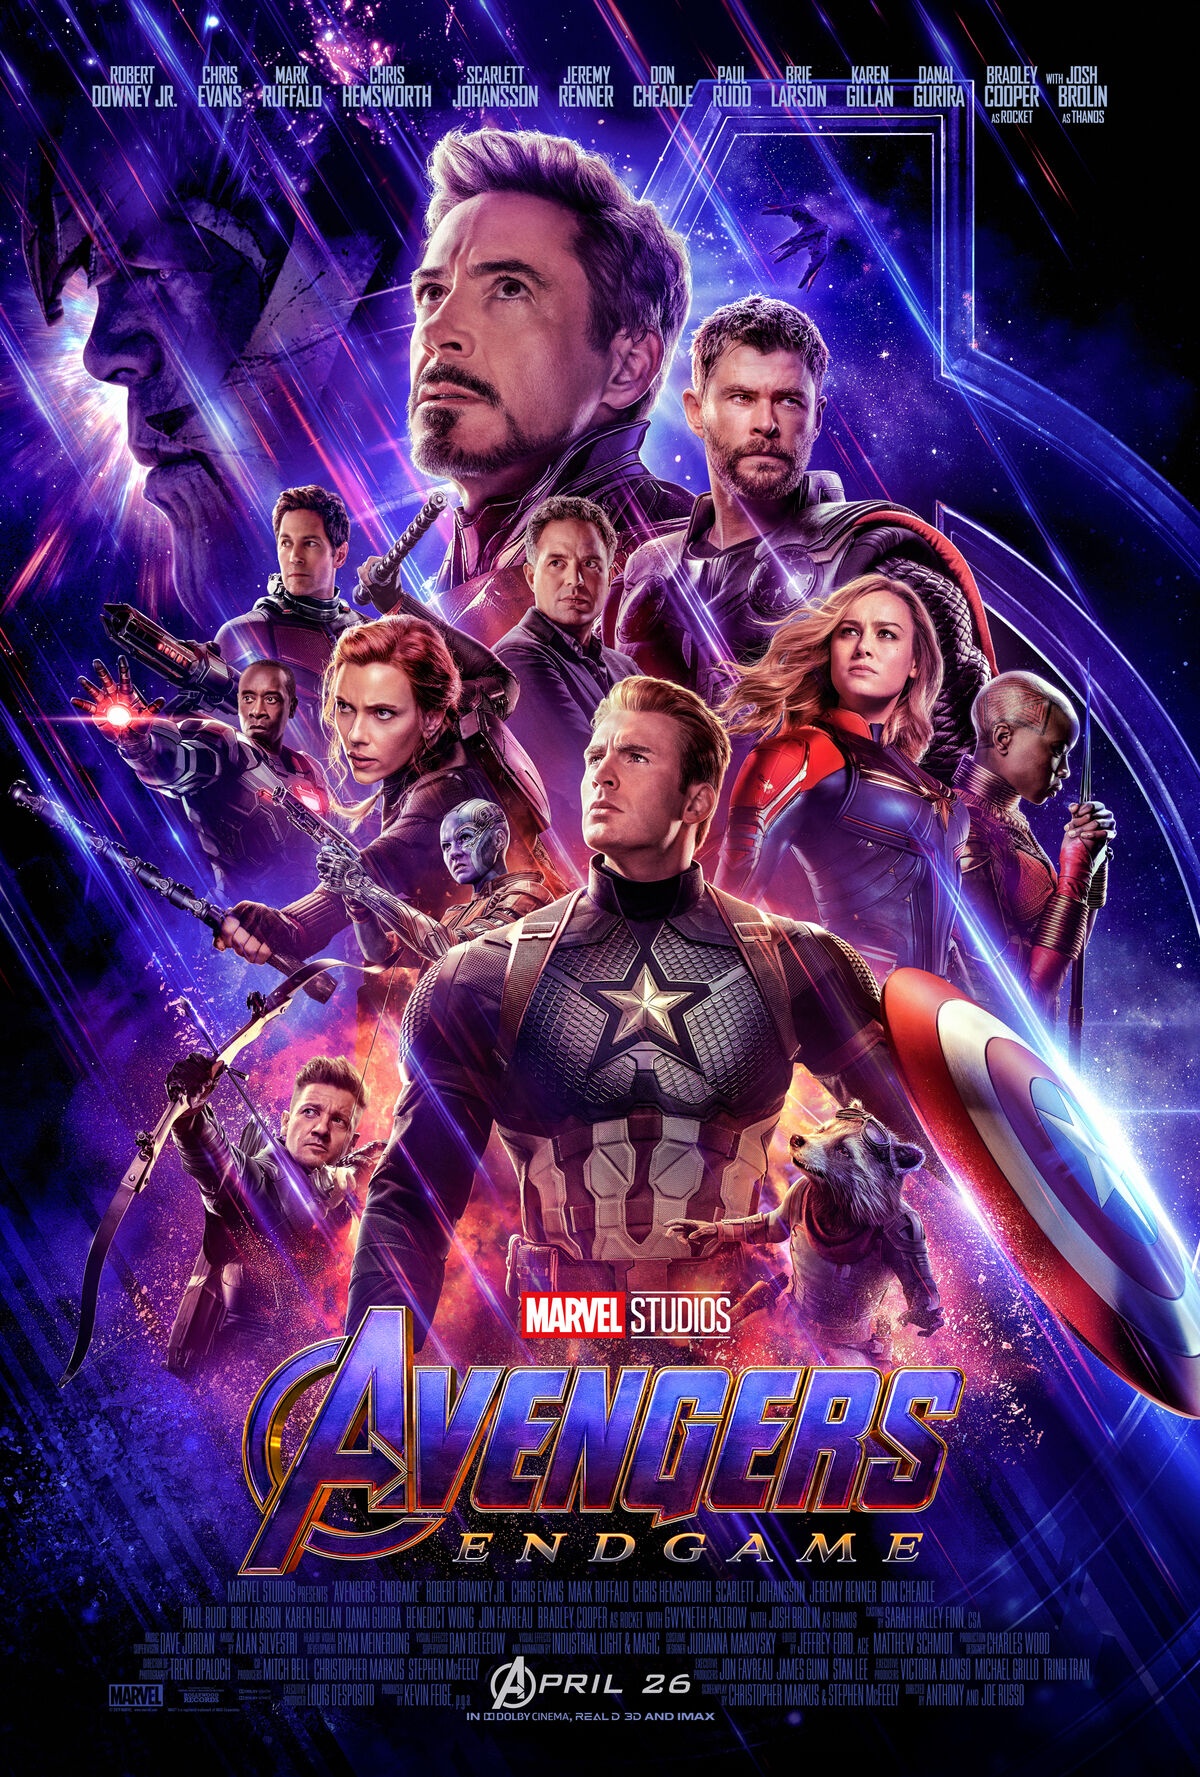 A physicist explains the science of 'Avengers: Endgame